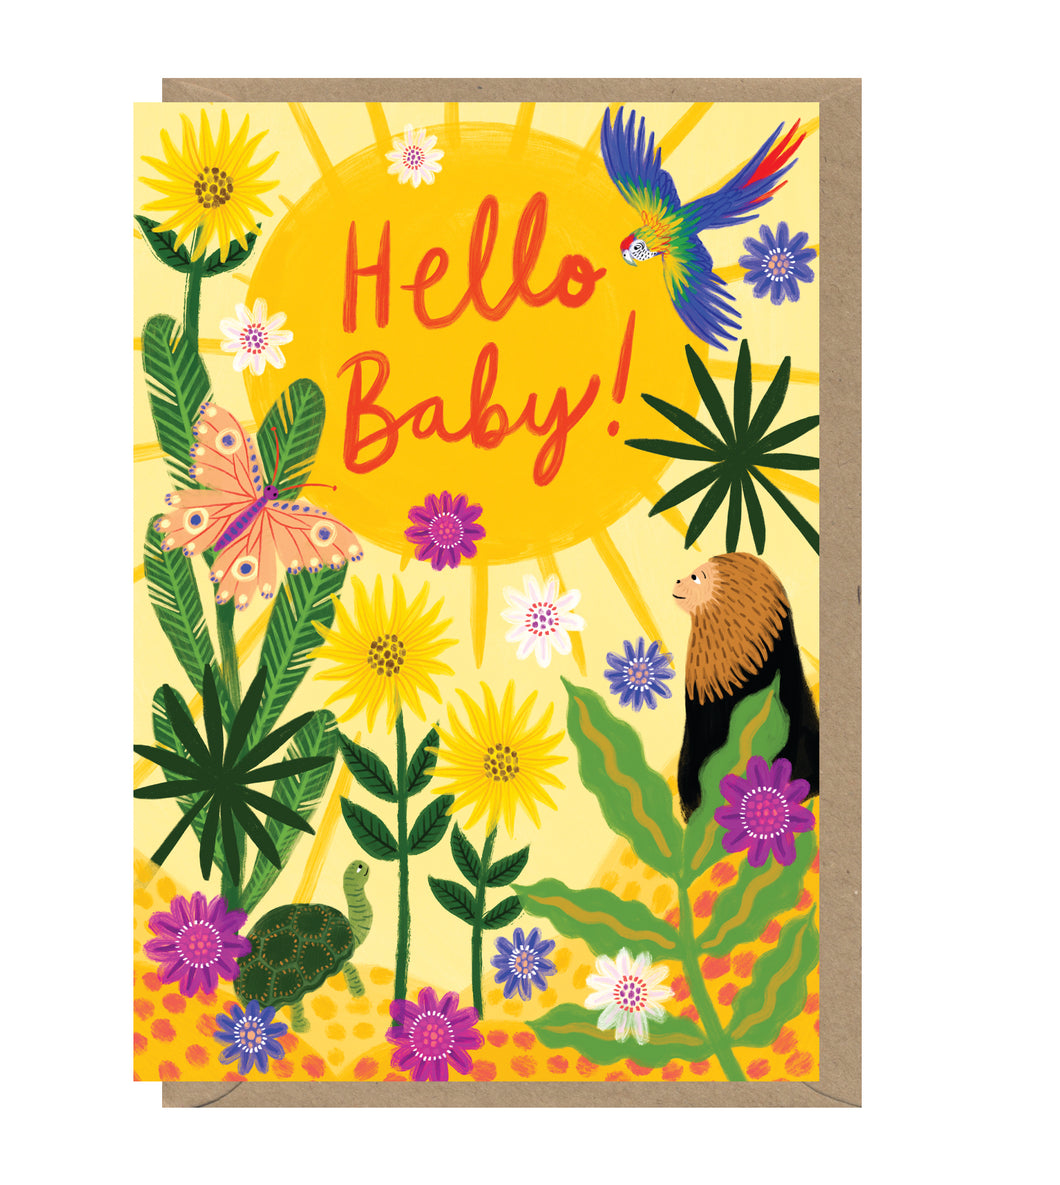 NEW BABY - GREETINGS CARD WITH BONBI FOREST ARTWORK